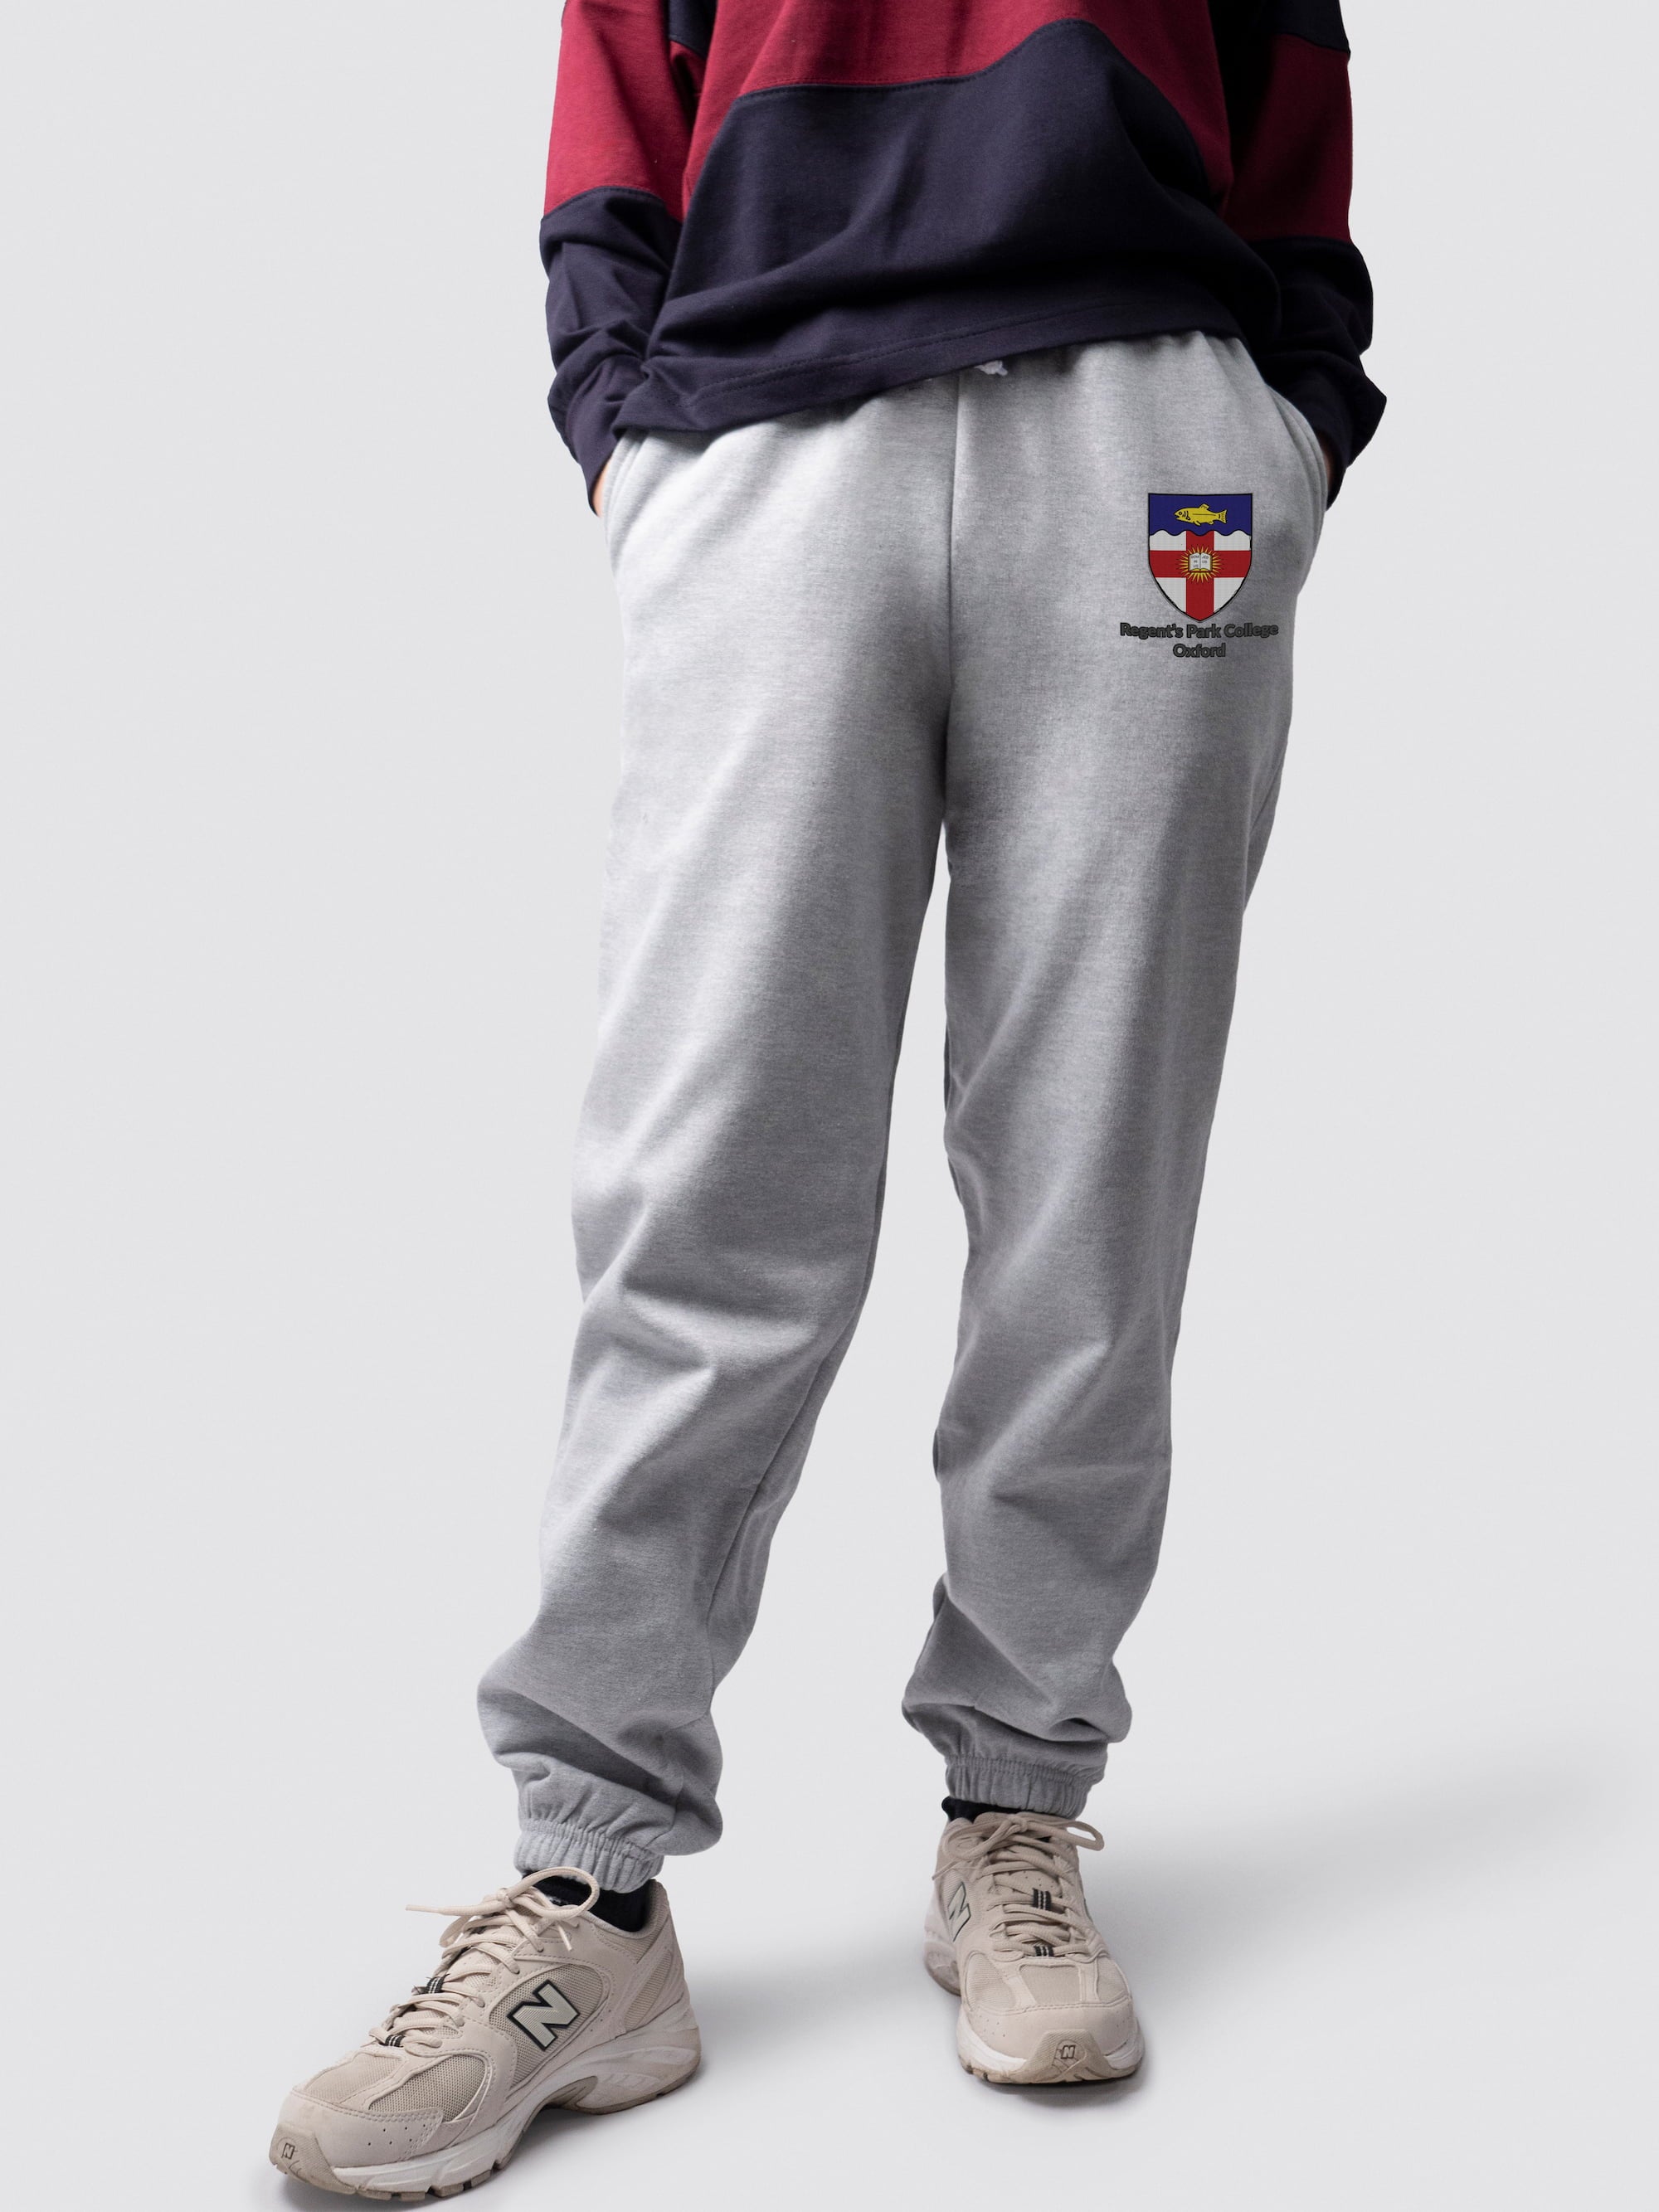 undergraduate cuffed sweatpants, made from soft cotton fabric, with Regent's Park logo